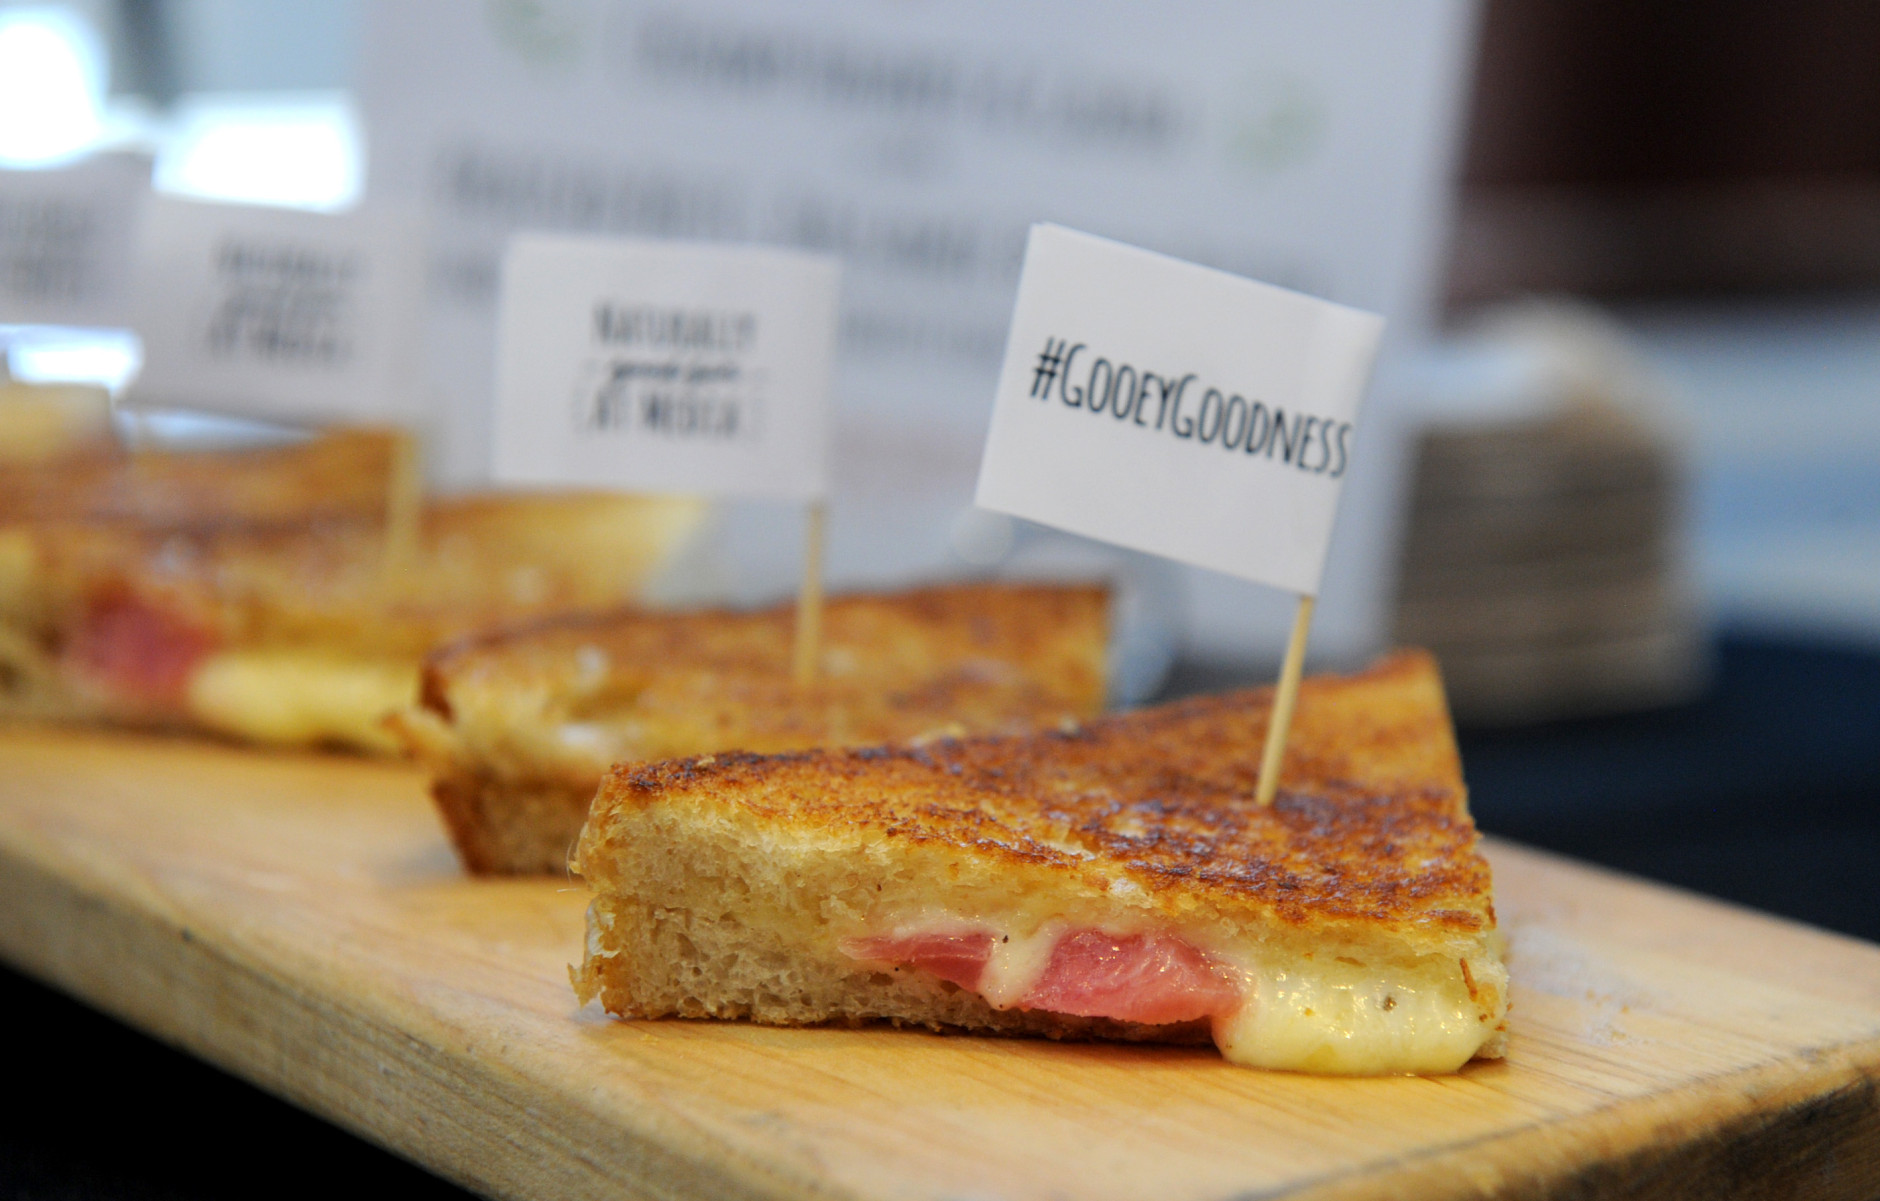 IMAGE DISTRIBUTED FOR ARLA FOODS - To celebrate National Grilled Cheese Month, cheese company Arla Dofino serves up signature Havarti, Gouda and braised beet grilled cheese sandwiches from Morris Truck, Wednesday, April 1, 2015 in New York.  For the recipe visit ArlaFoodsUSA.com/grilledcheese.  (Photo by Diane Bondareff/Invision for Arla Foods/AP Images)